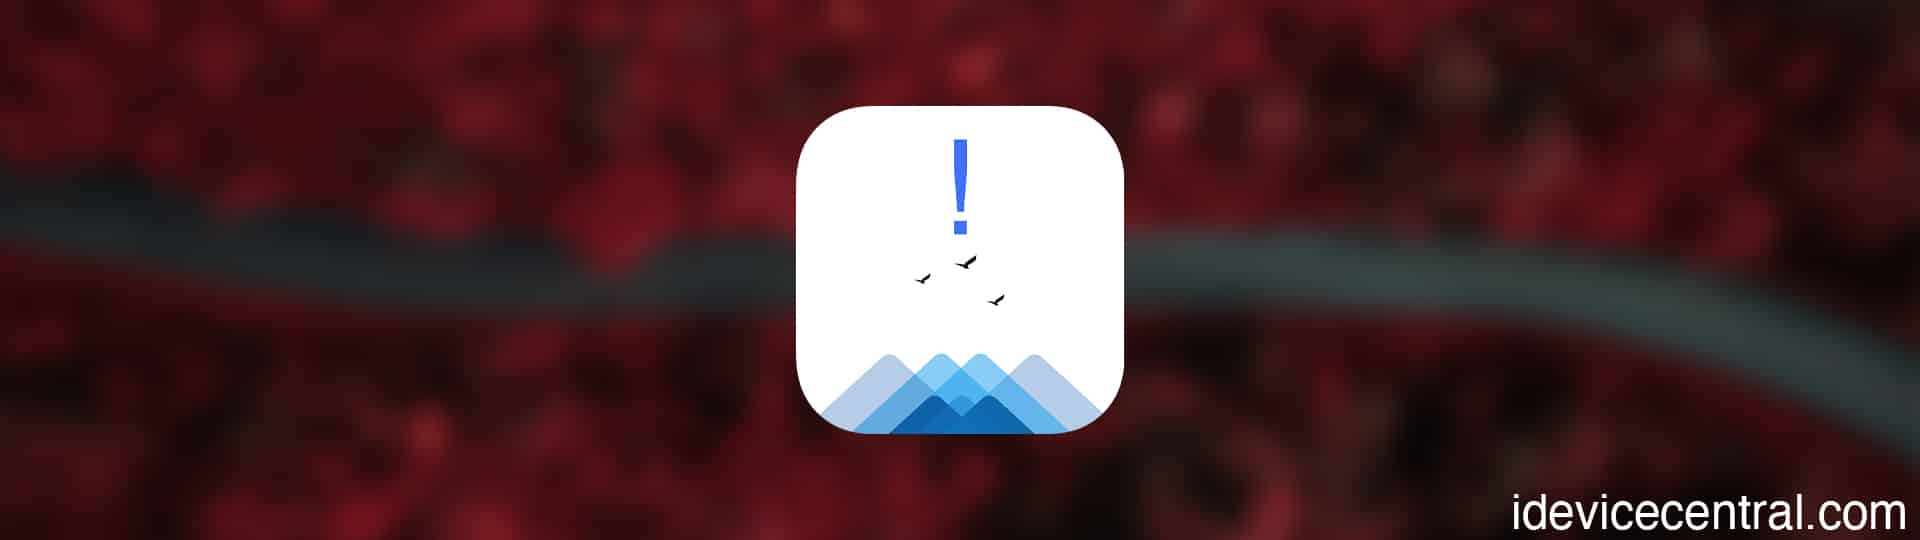 How to fix the Unable To Verify App error on iOS 16 using the new Limitless App